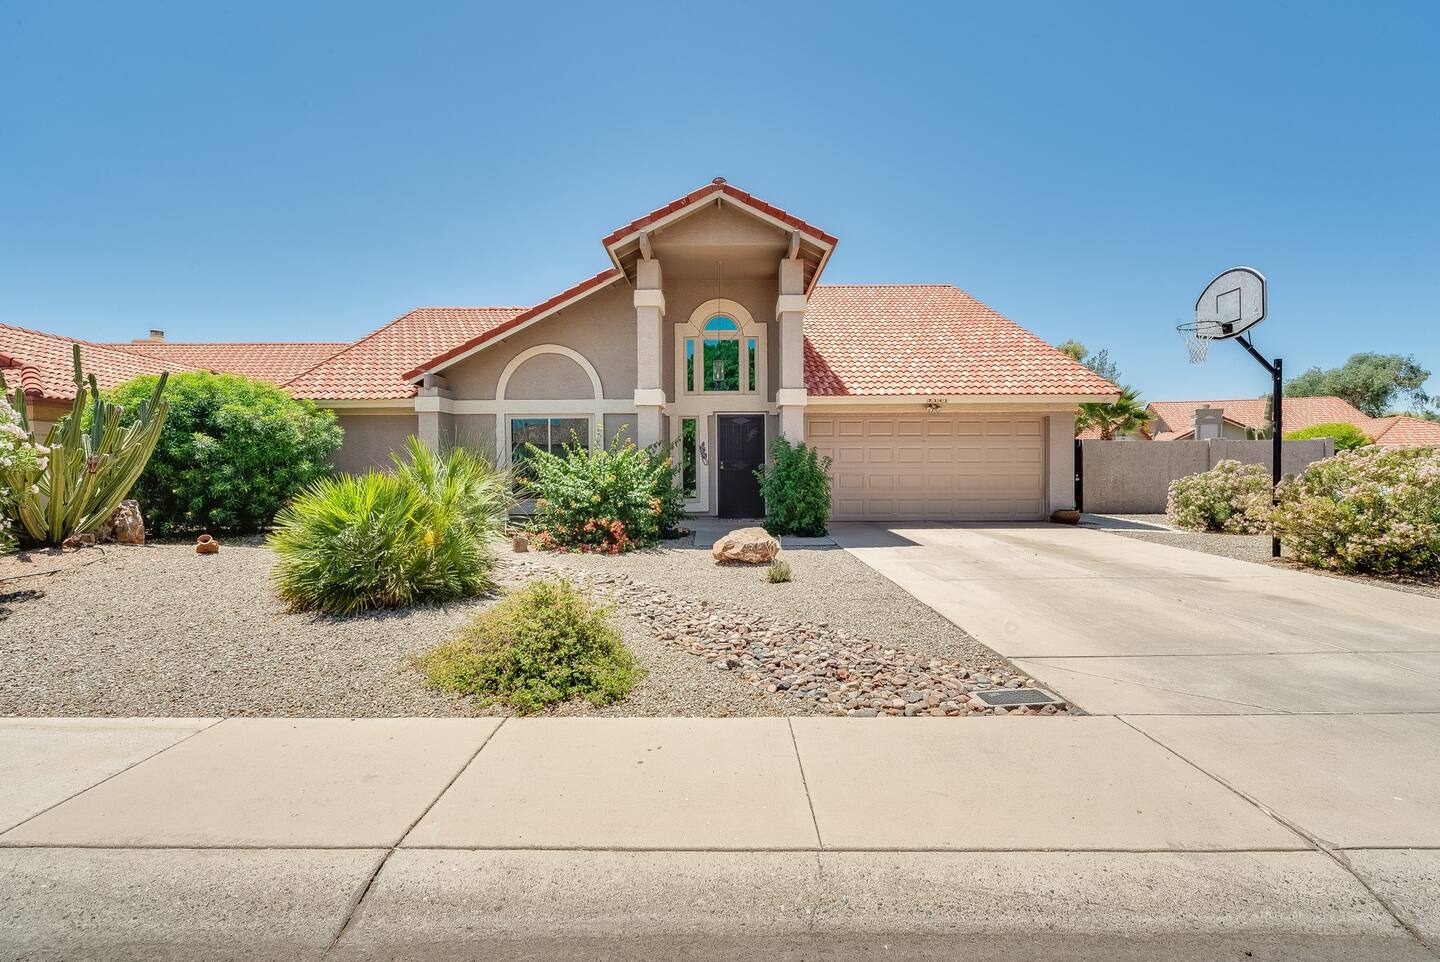 Glendale Vacation Rentals, Cahill Casa - Centrally located 2 bedroom, 1.5-bathroom home in Glendale AZ is the perfect place for time away from the hustle and bustle of busy city life.